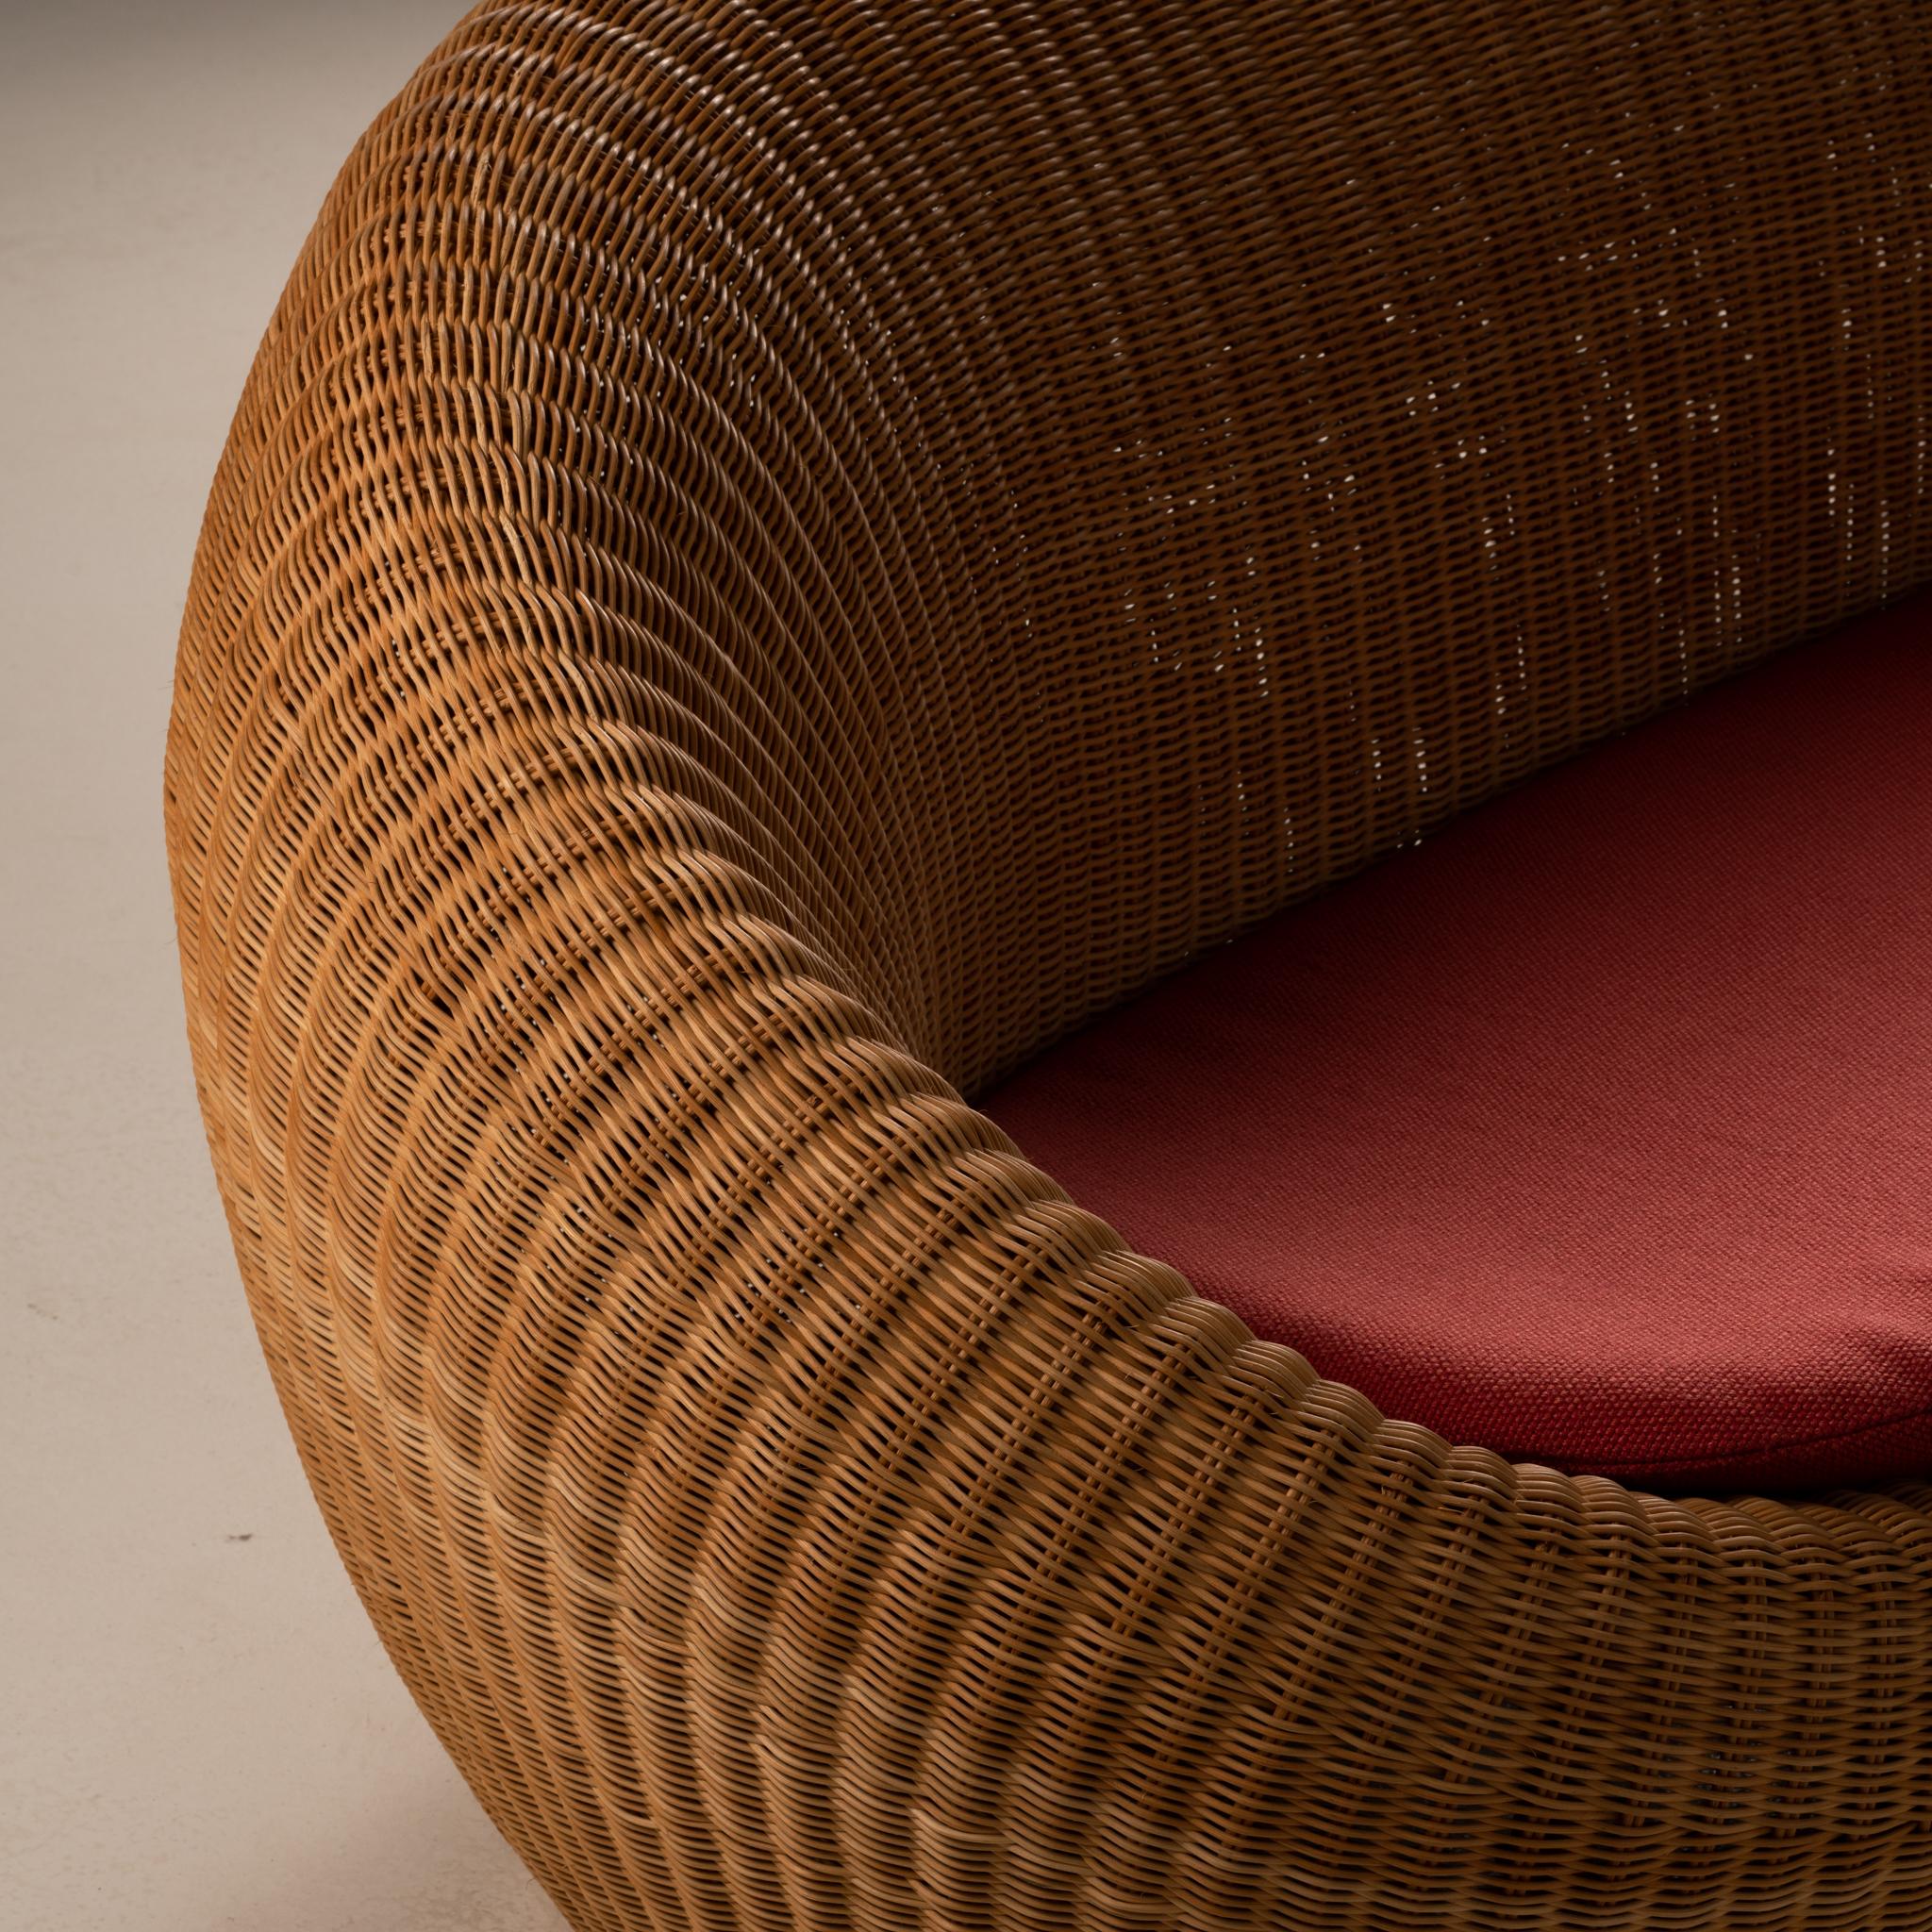 Japanese Rattan Sofa by Isamu Kenmochi, 1960s For Sale